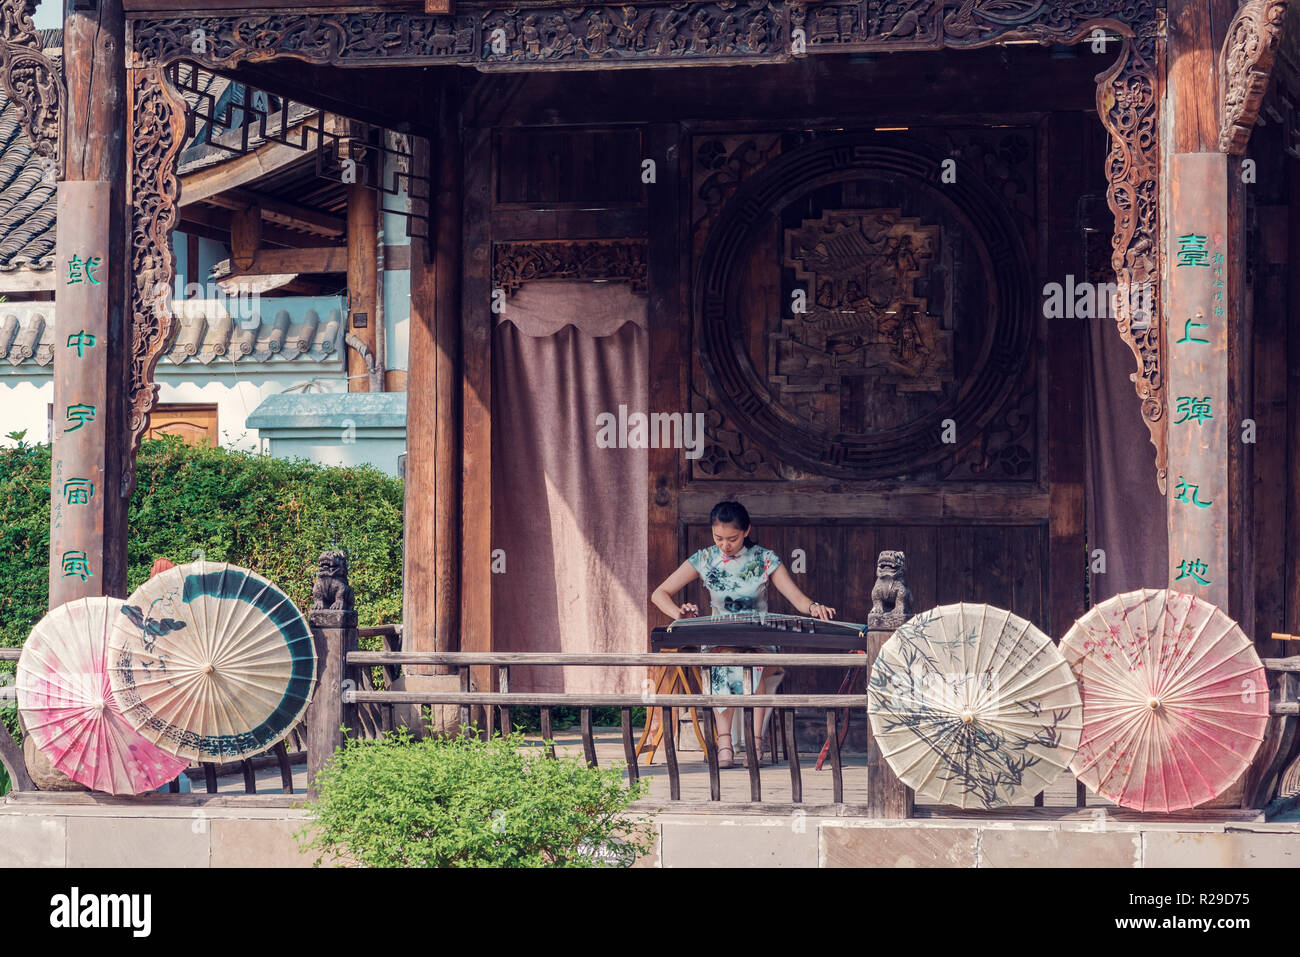 Anren, Sichuan province, China - Aug 26, 2018 : Woman playing Guzheng traditional chinese music string instrument Stock Photo